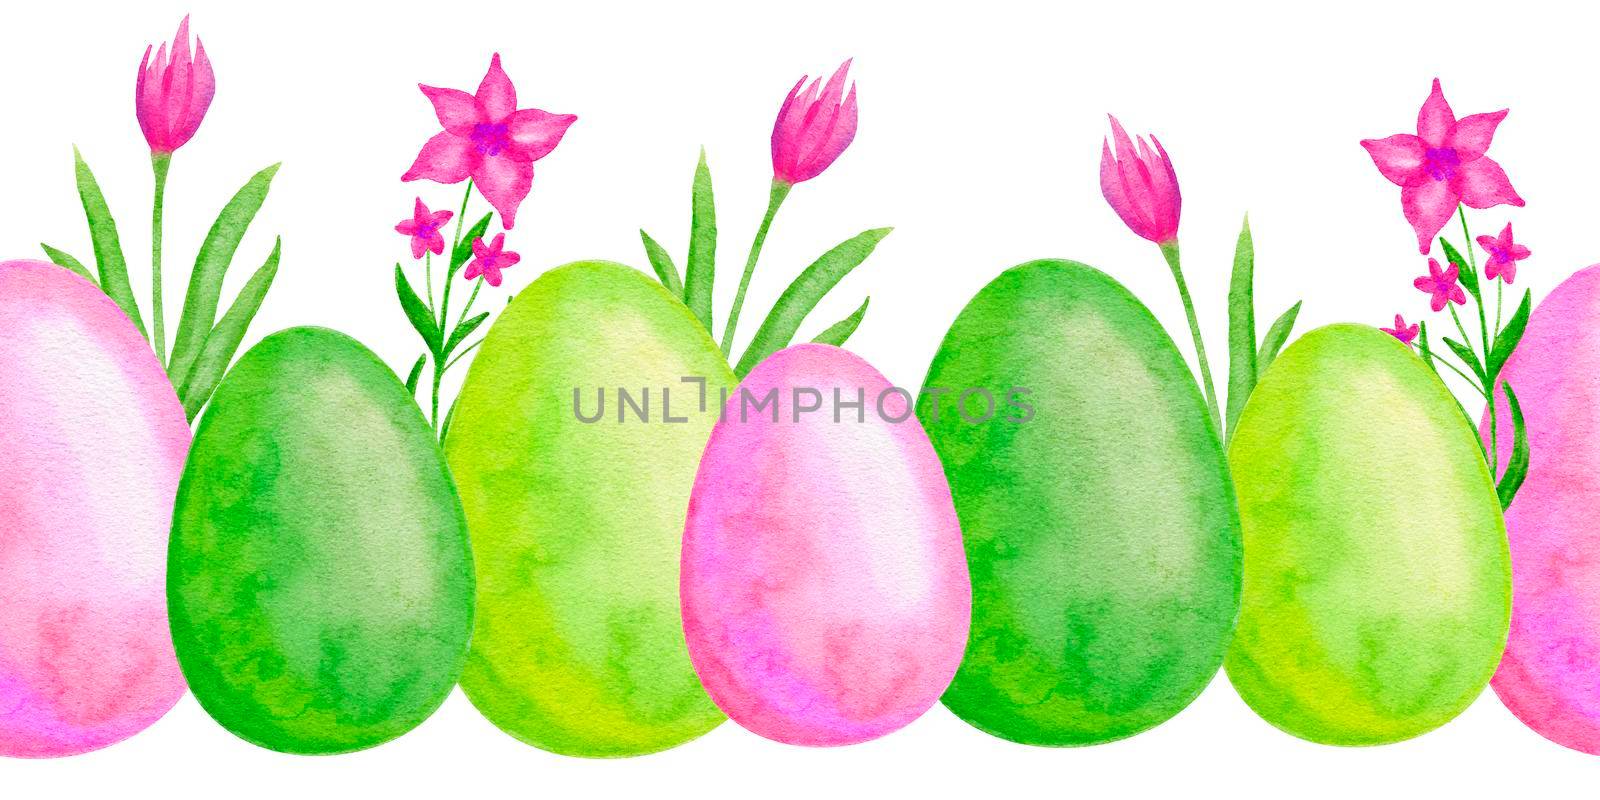 Seamless watercolor hand drawn horizontal borders with Easter eggs green pink tulip daisy flowers cartoon design. April spring print with bright funny elements for Easter cards invitations. by Lagmar